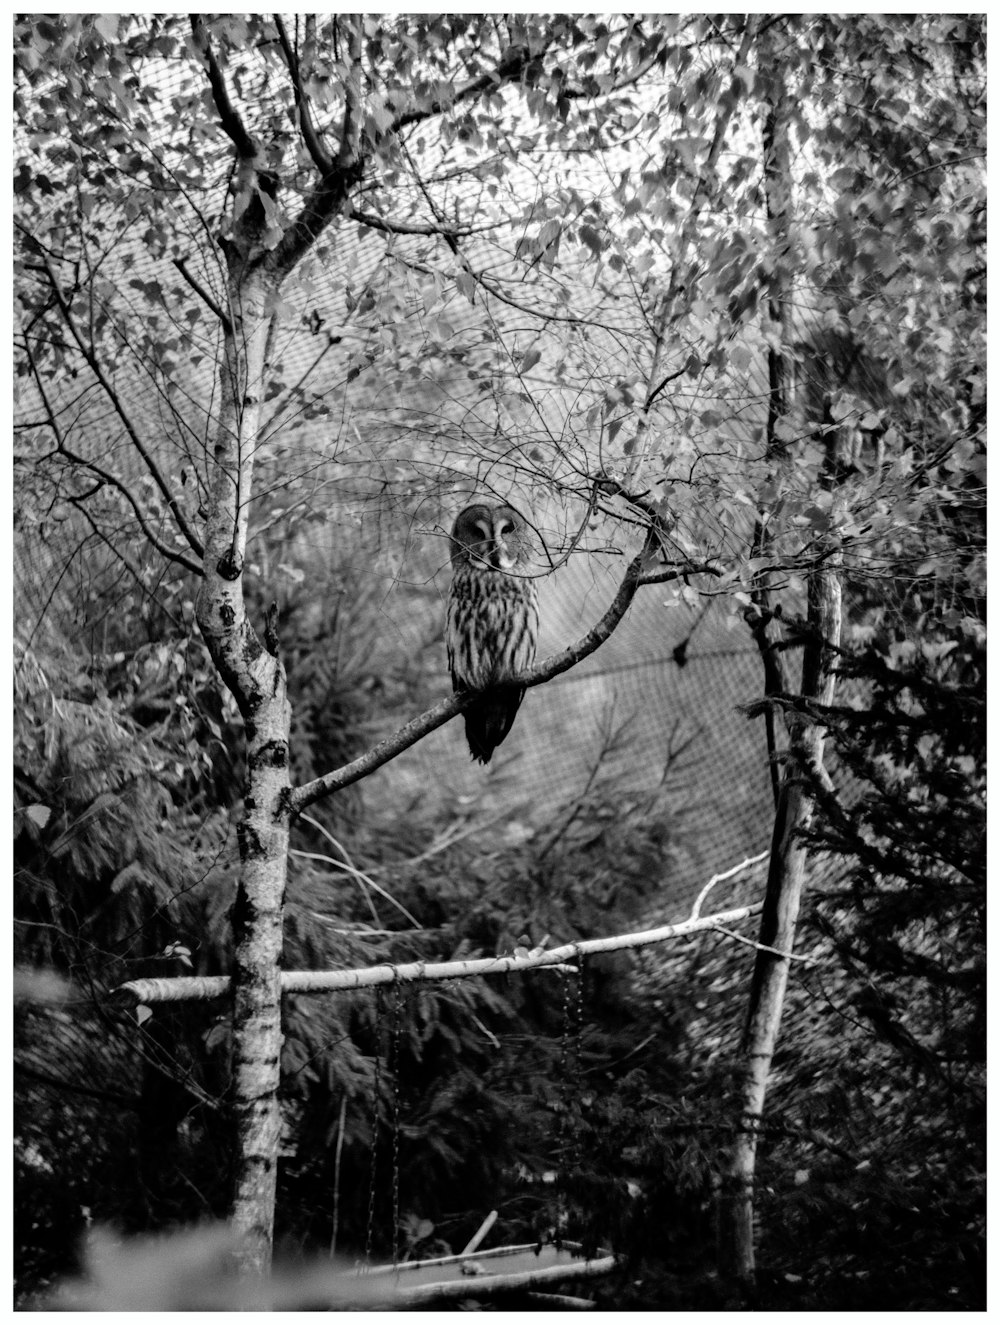 grayscale photo of owl on tree branch